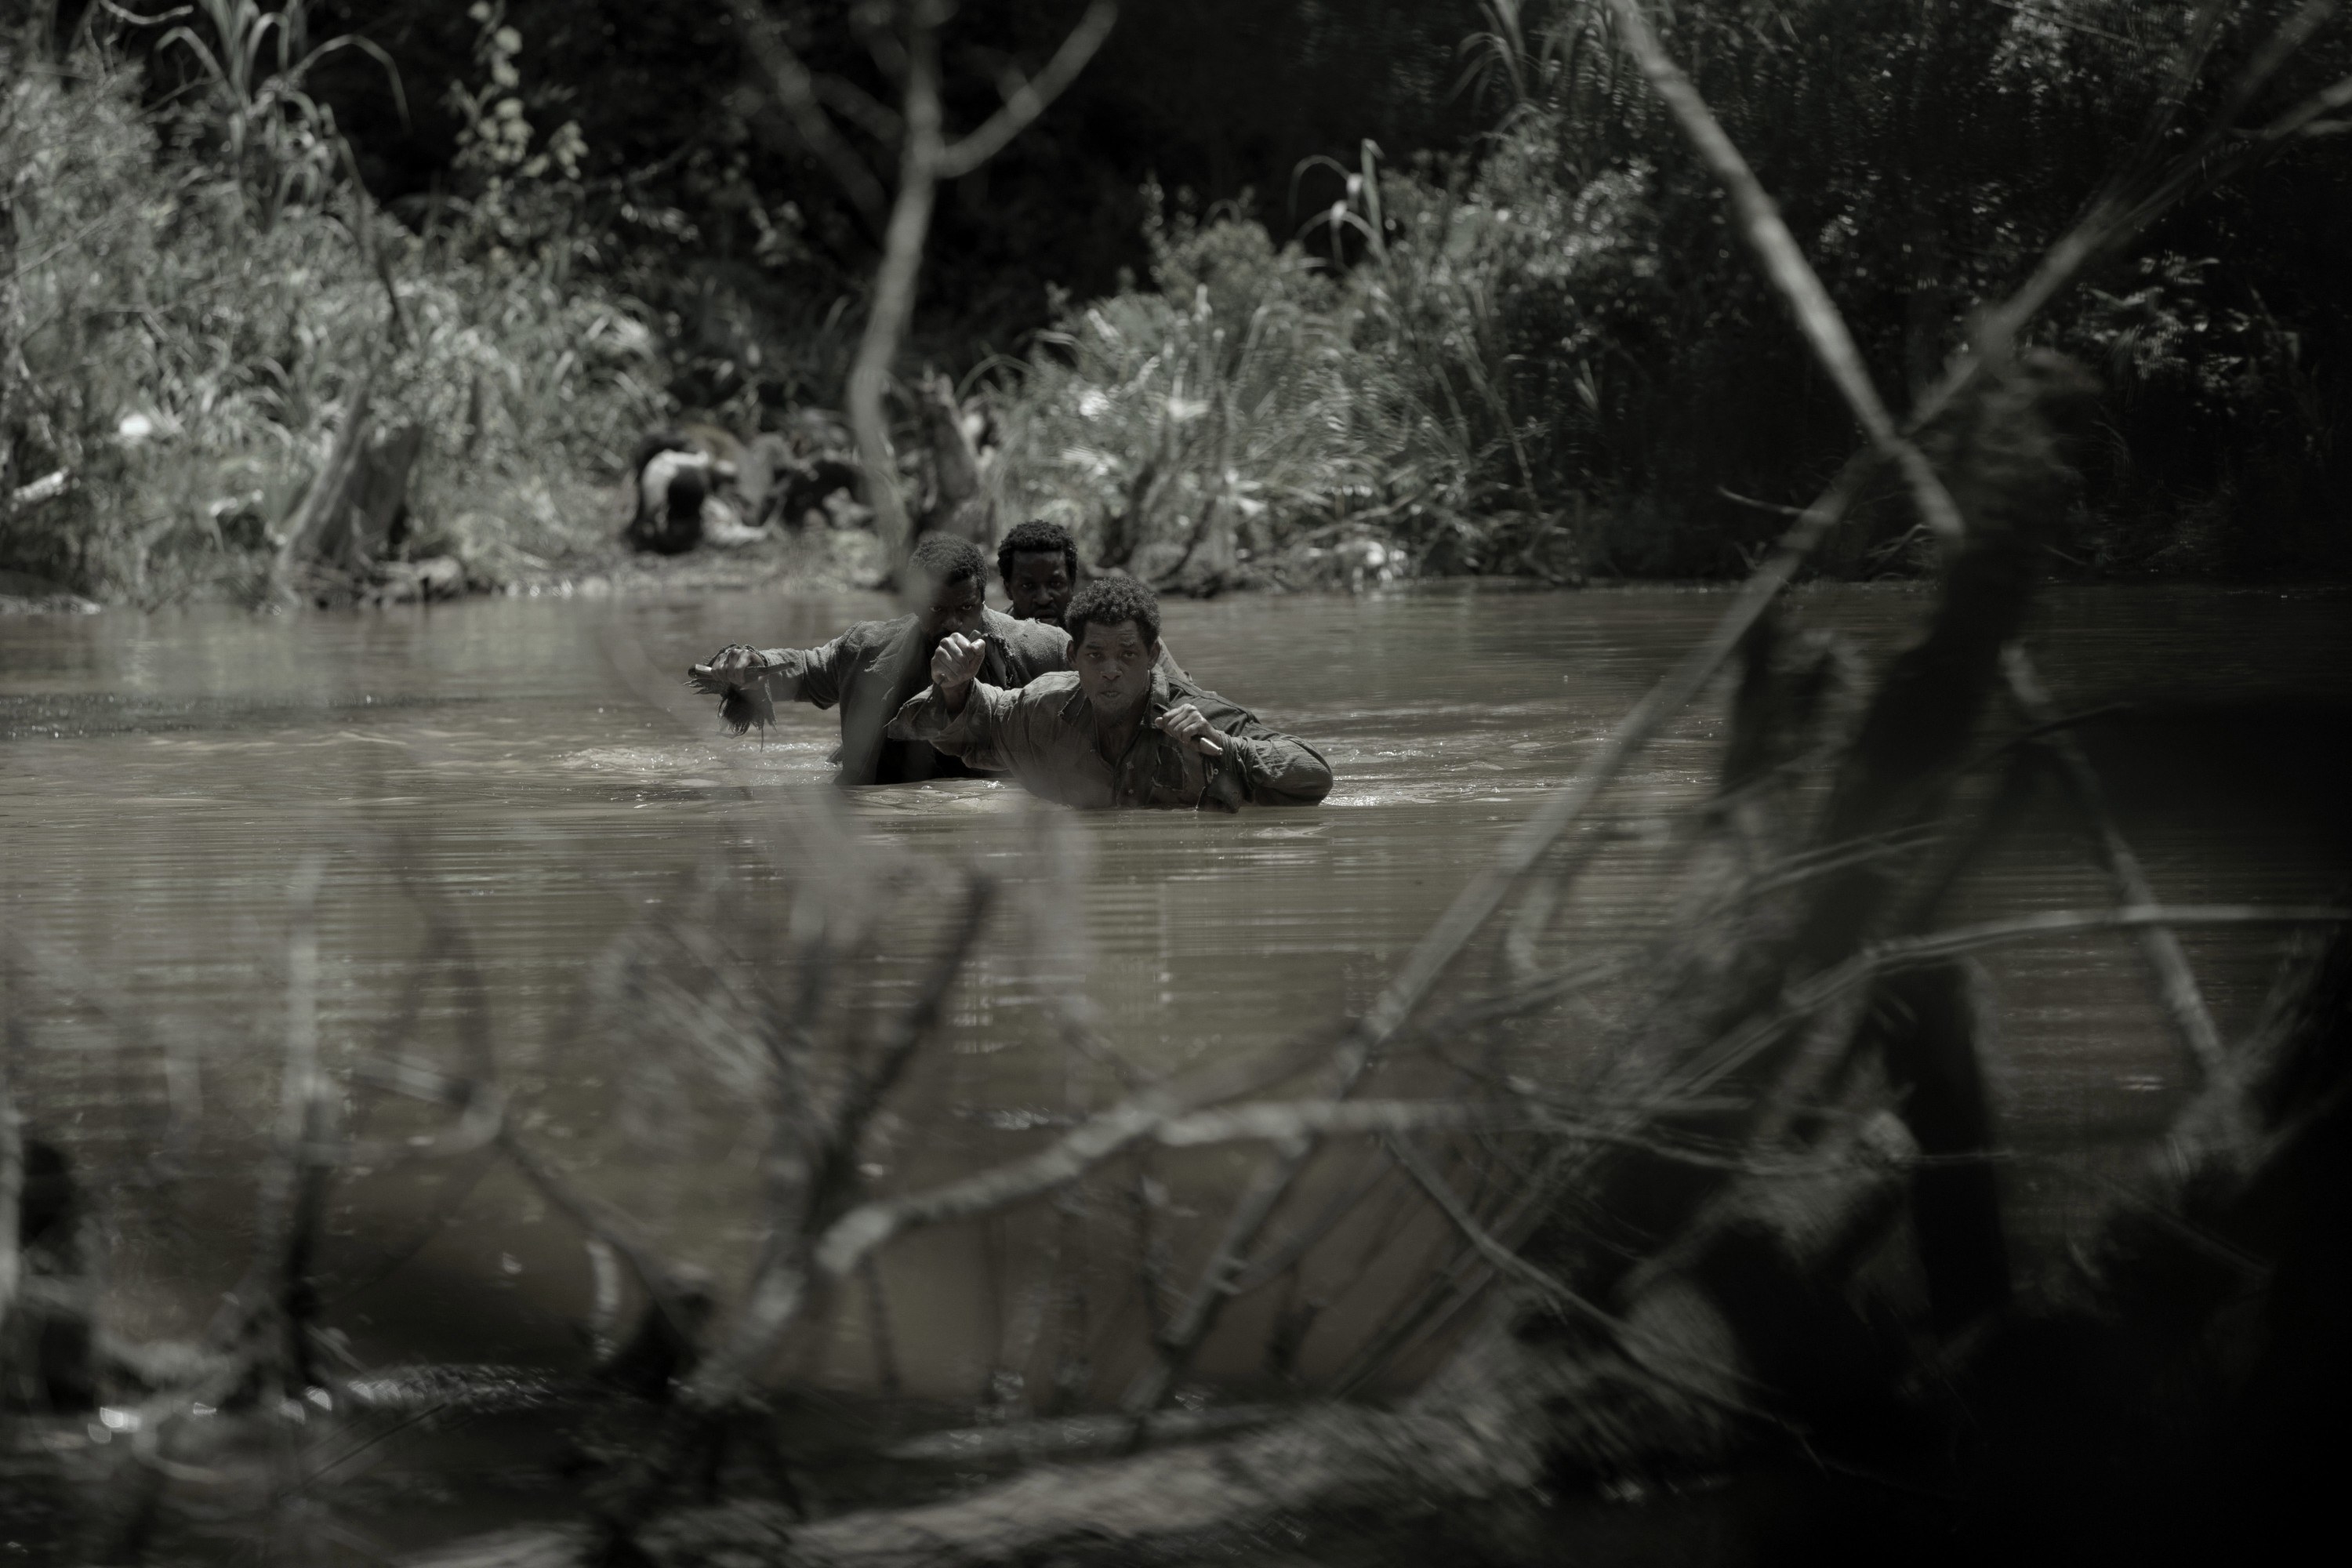 will in the film wlking through a river